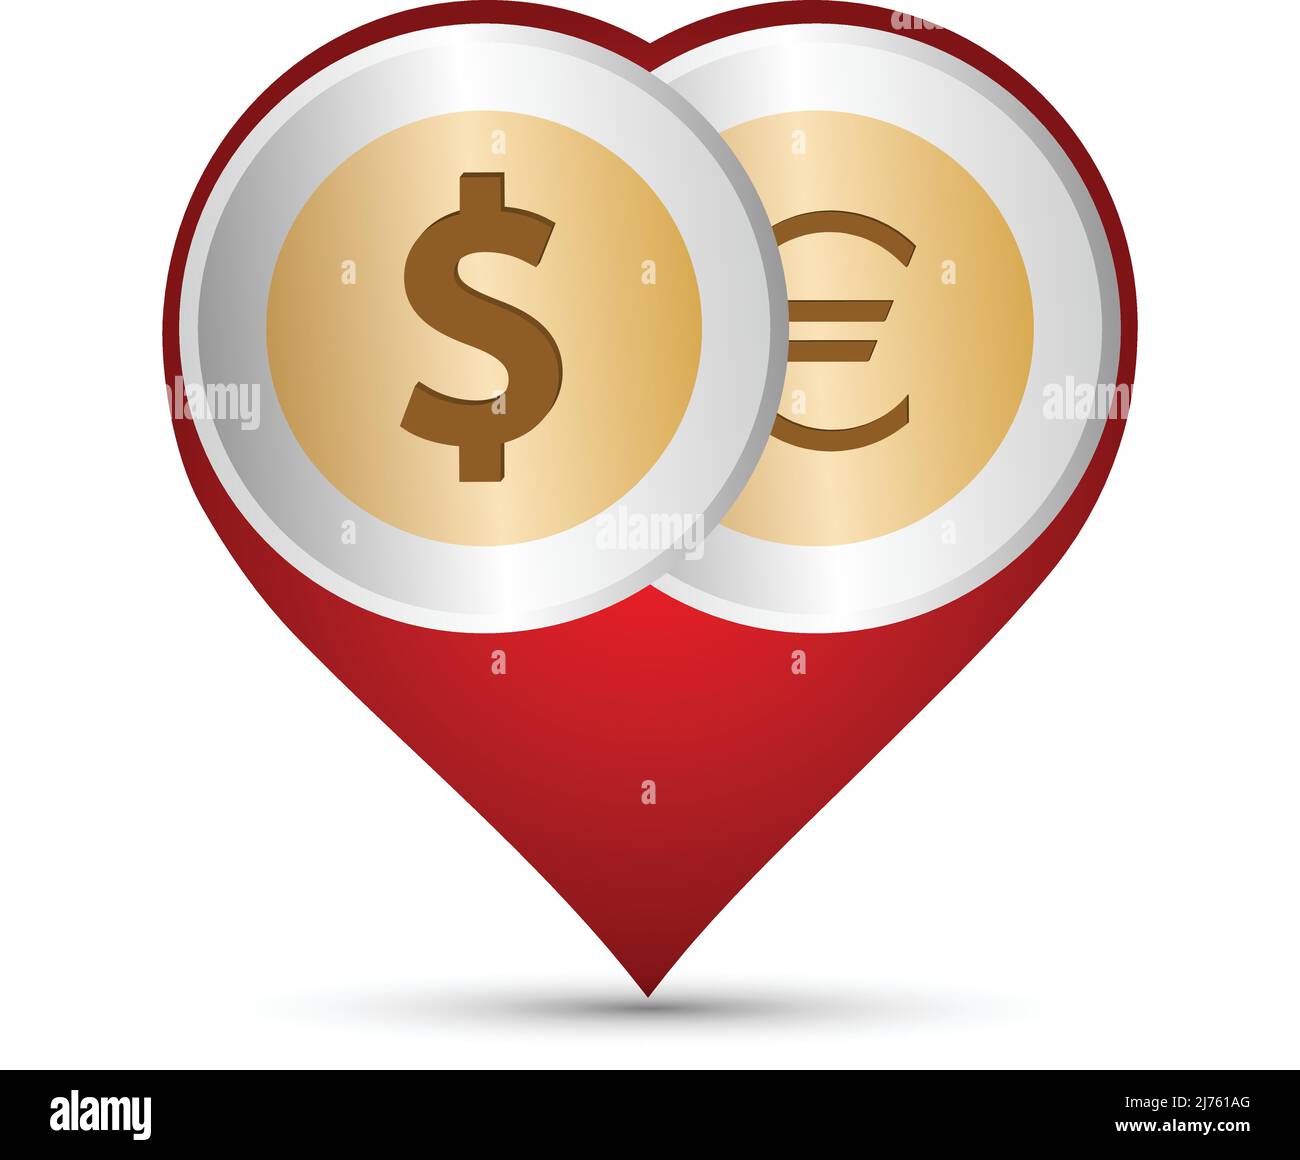 The American dollar coin and euro coin symbols on red heart shape Stock Vector